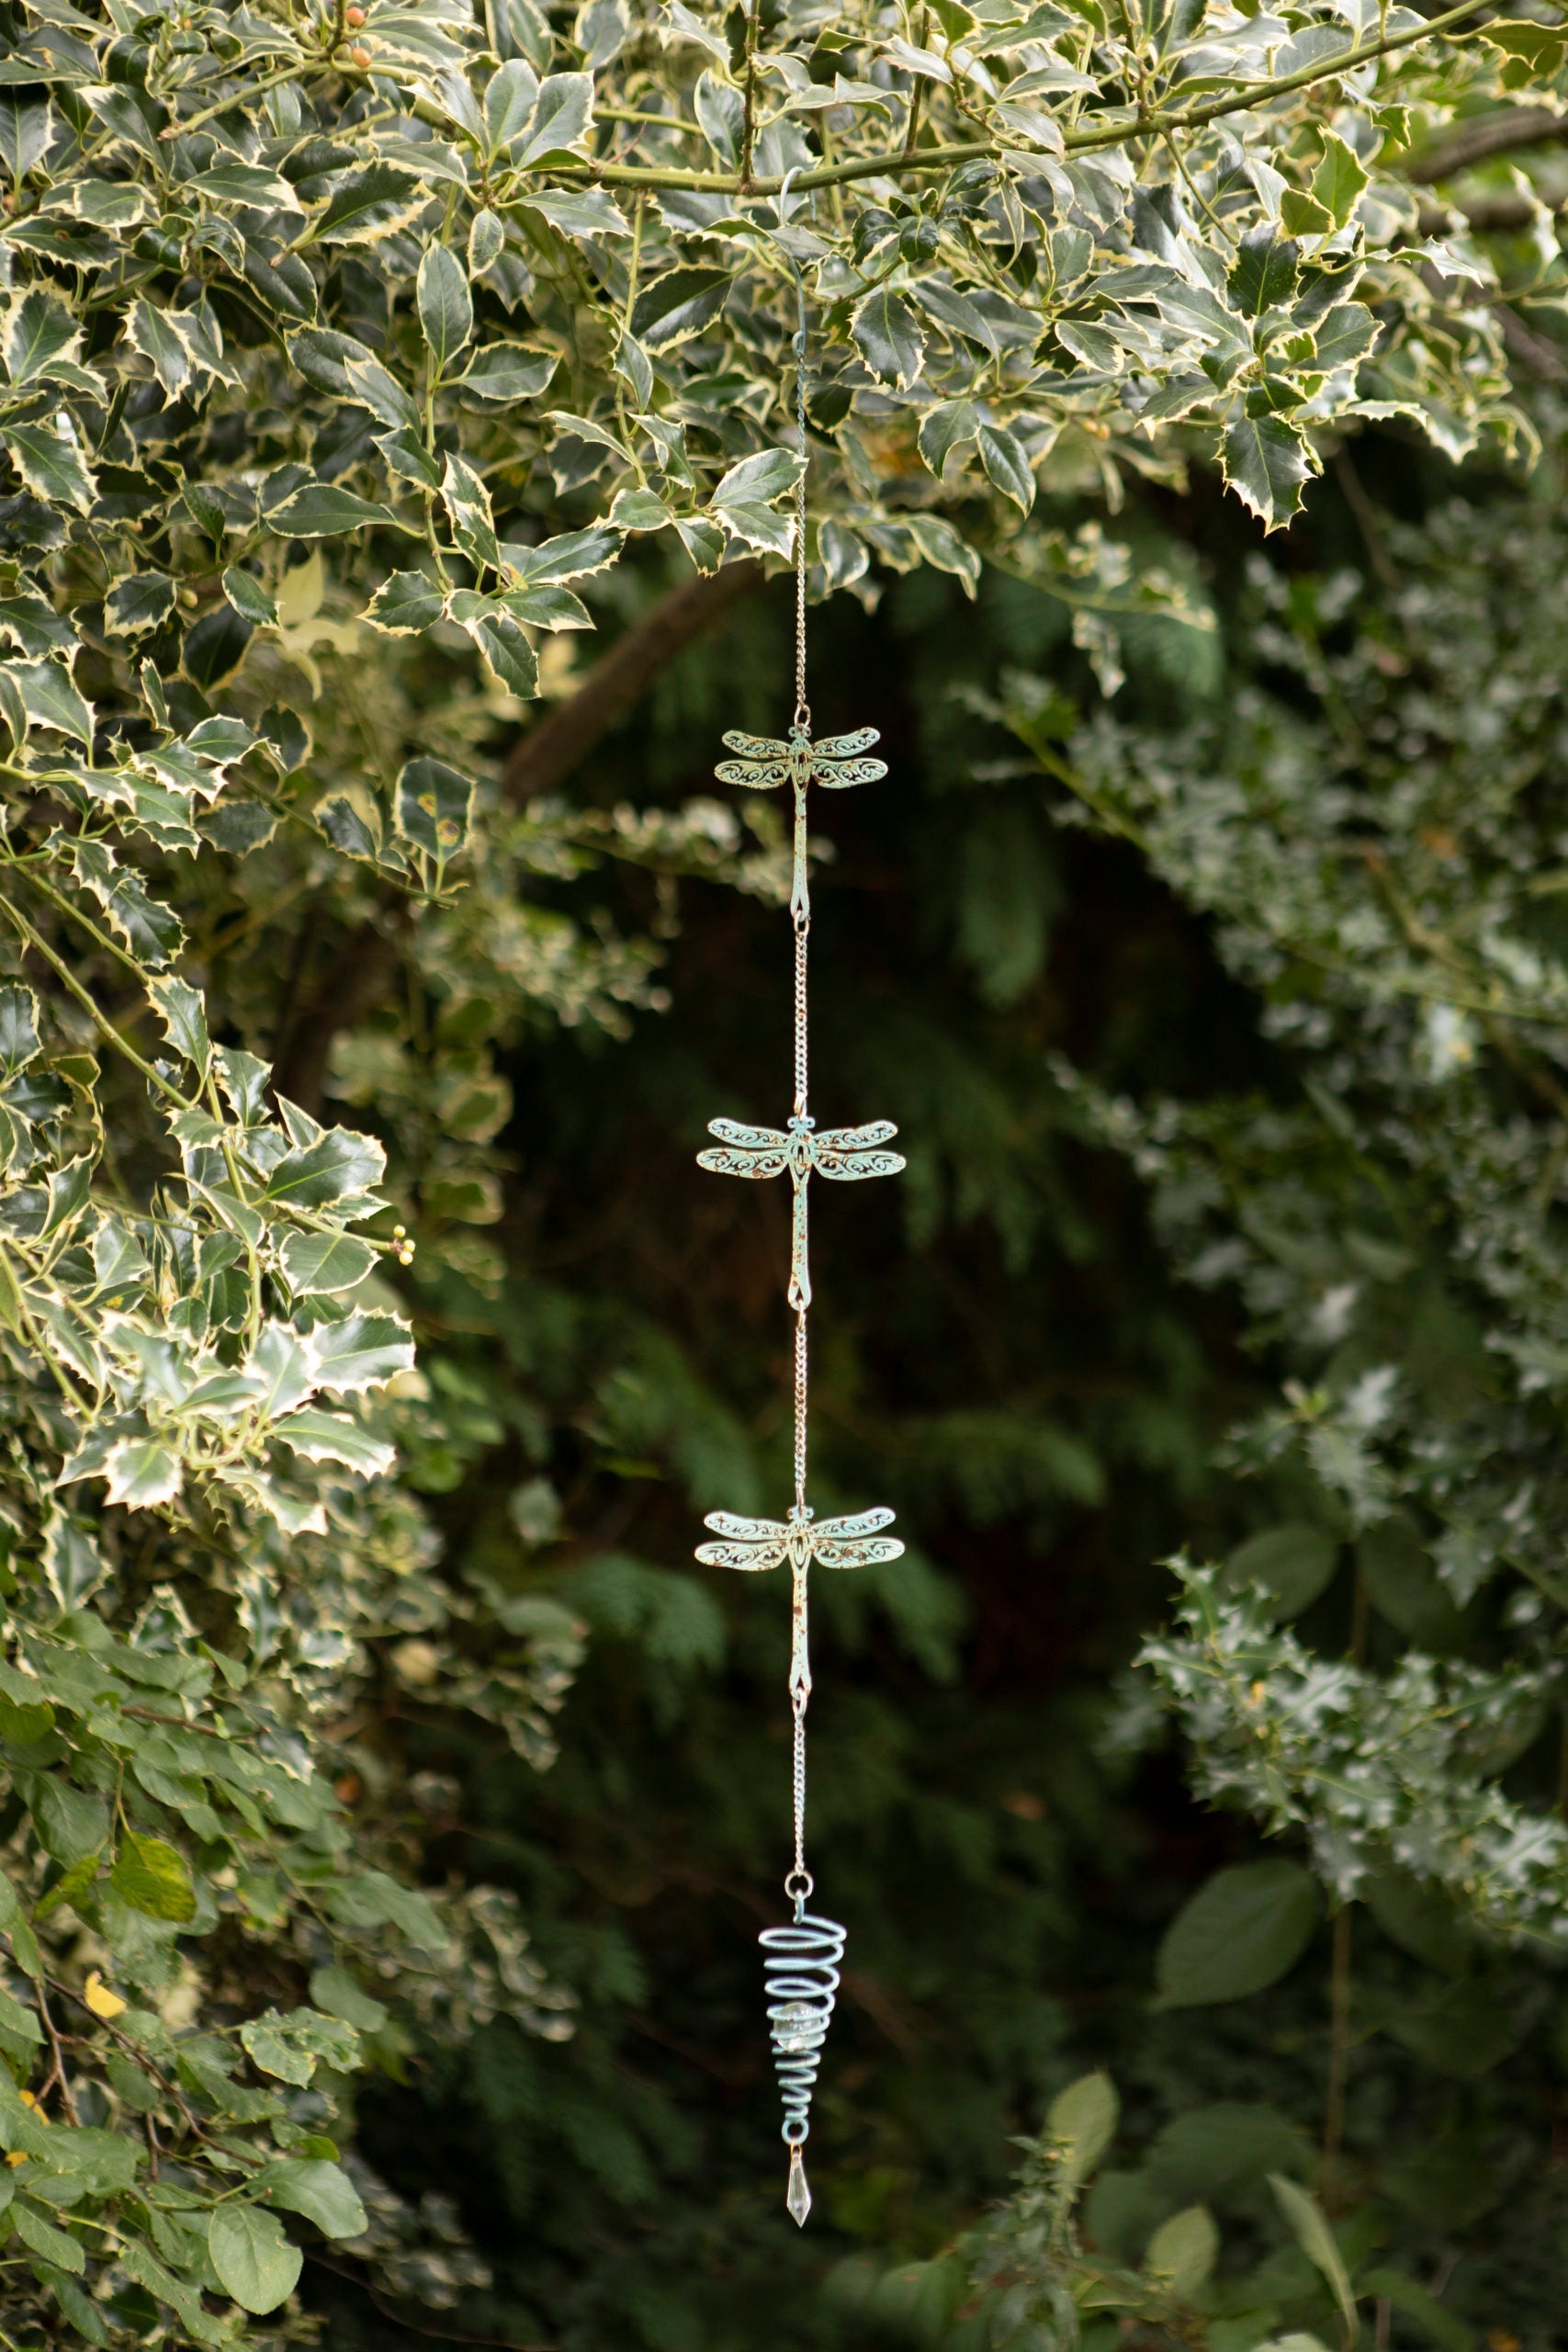 Hanging Dragonfly chain